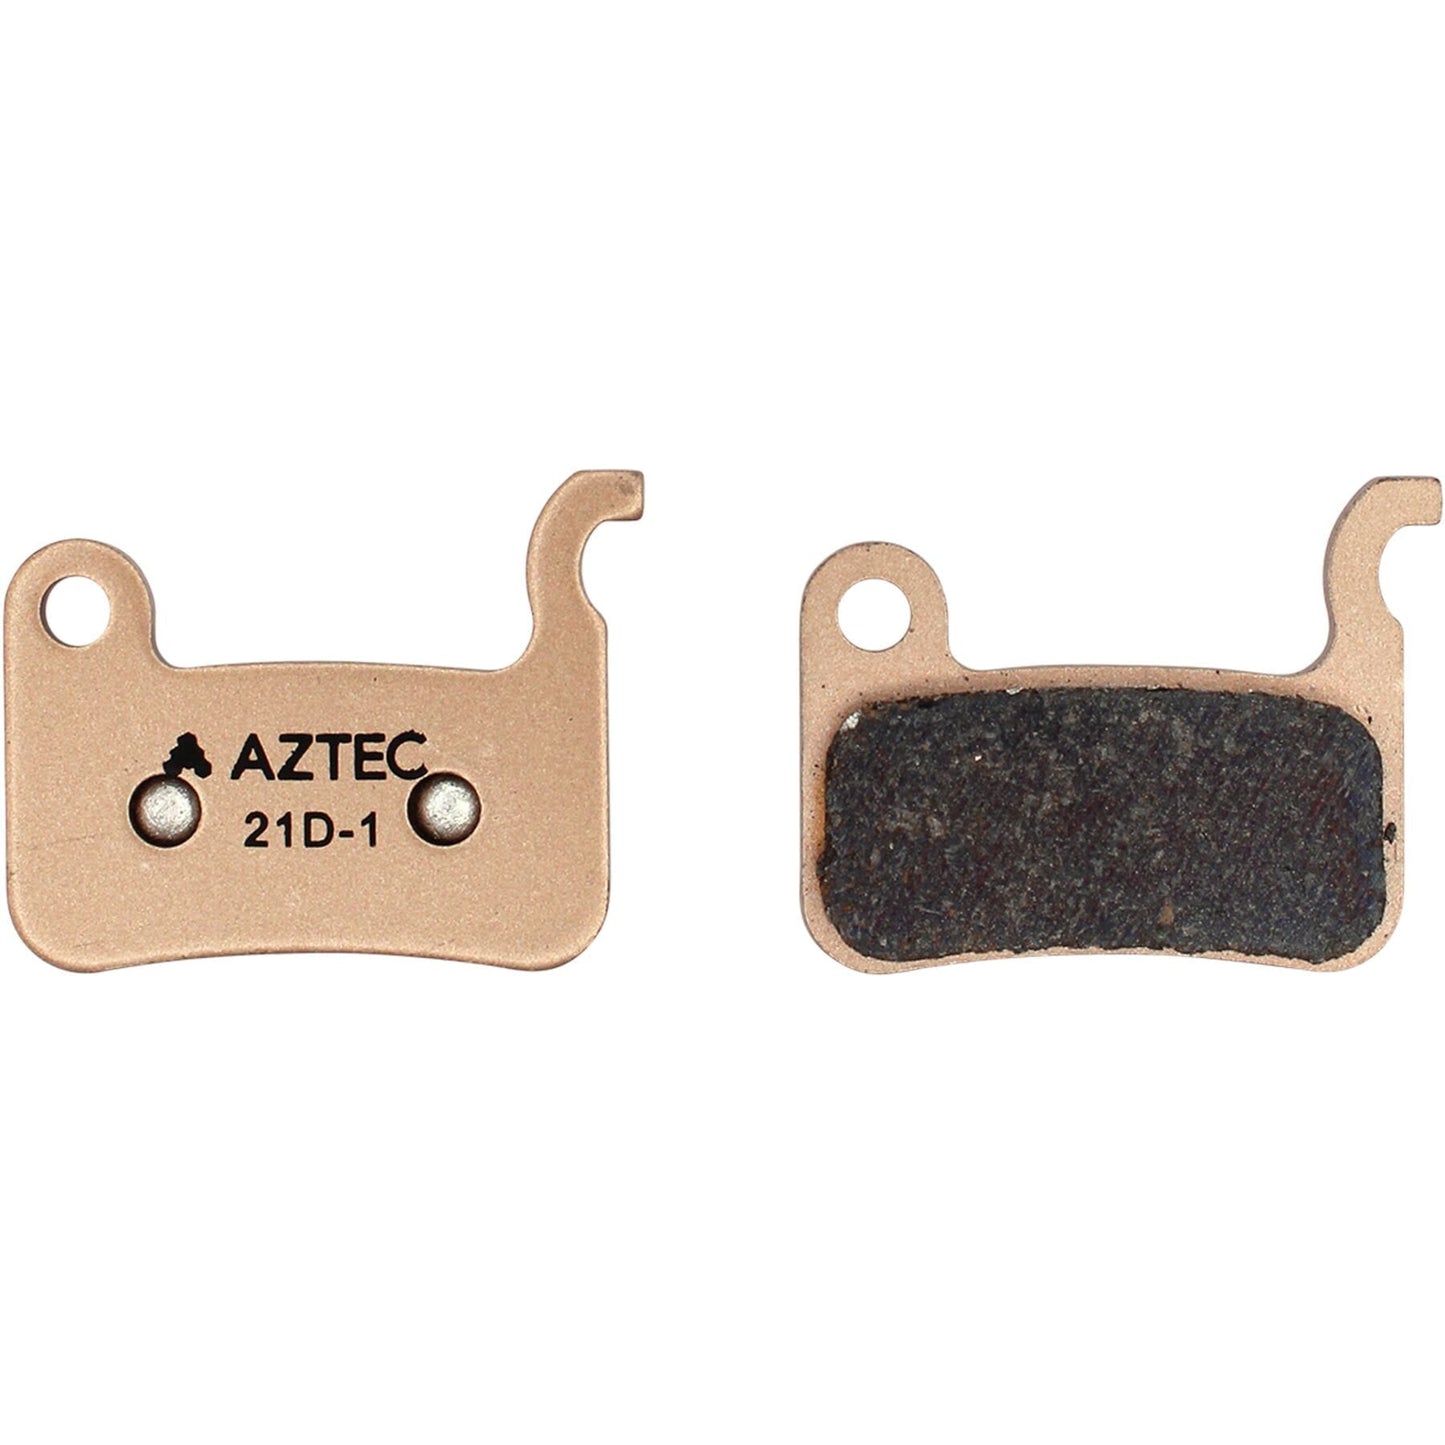 Sintered Disc Brake Pads For Shimano M965 XTR / M966 Callipers